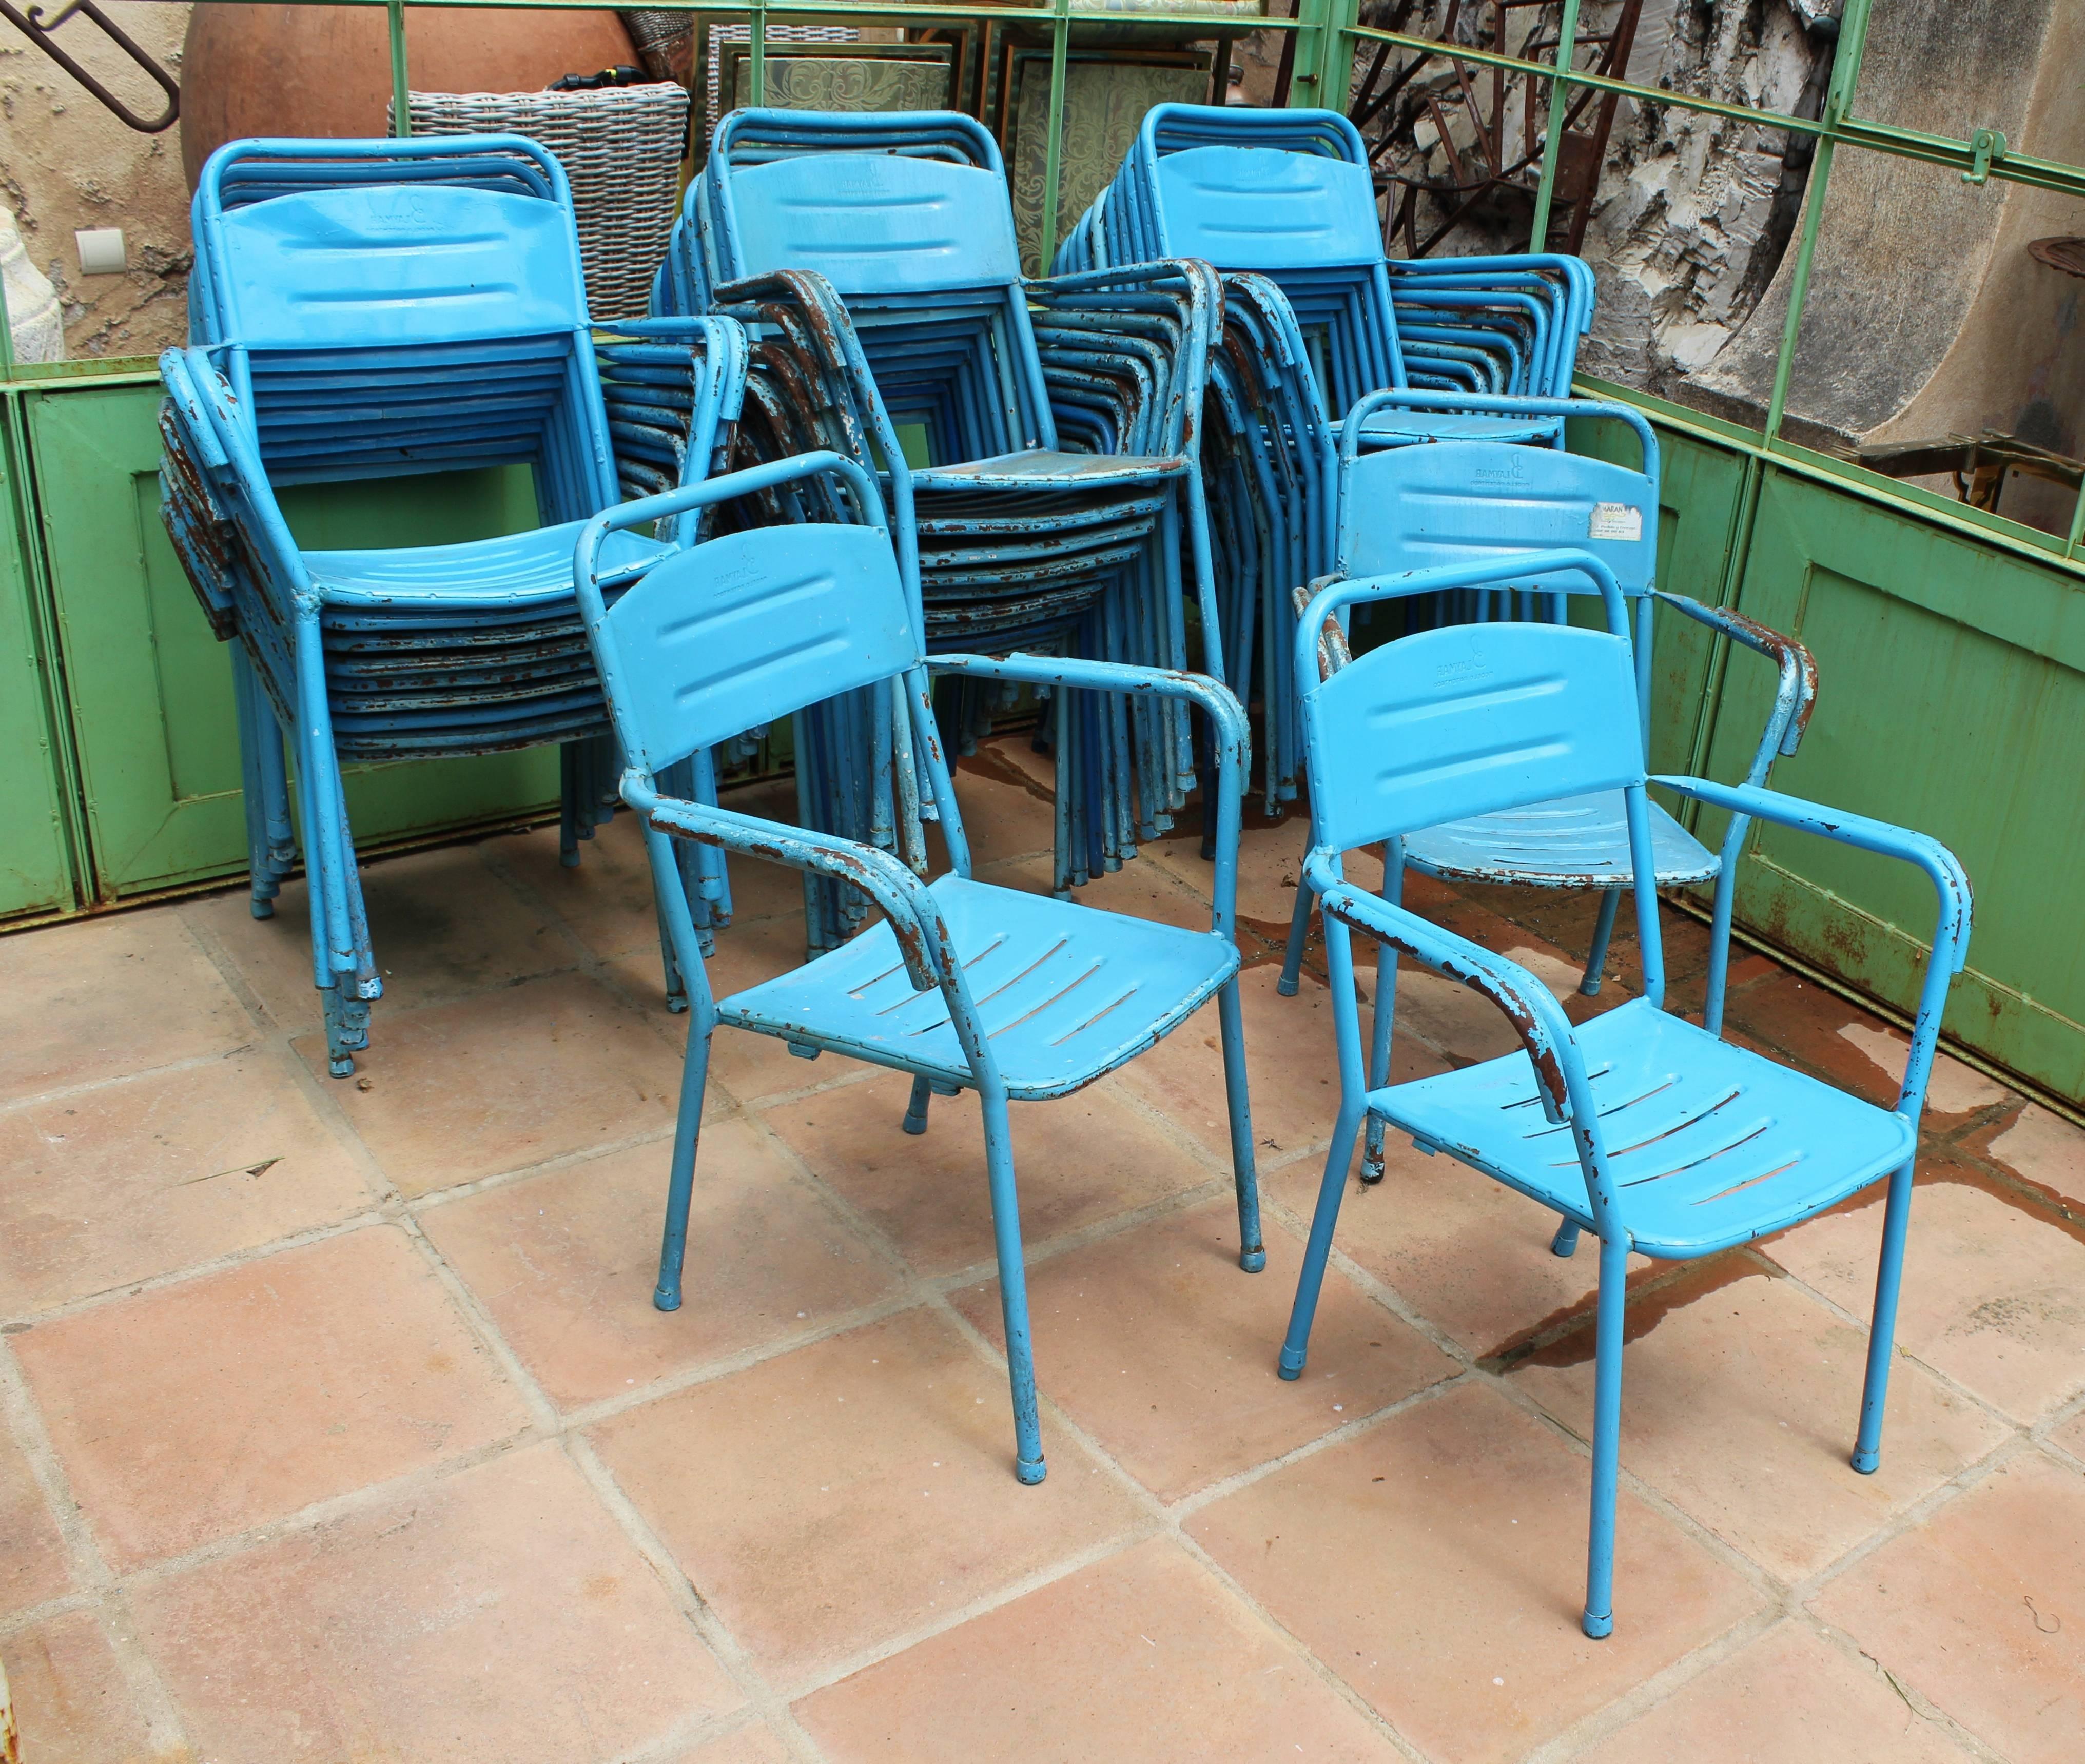 Set of 32 Spanish made iron chairs in their original blue color.